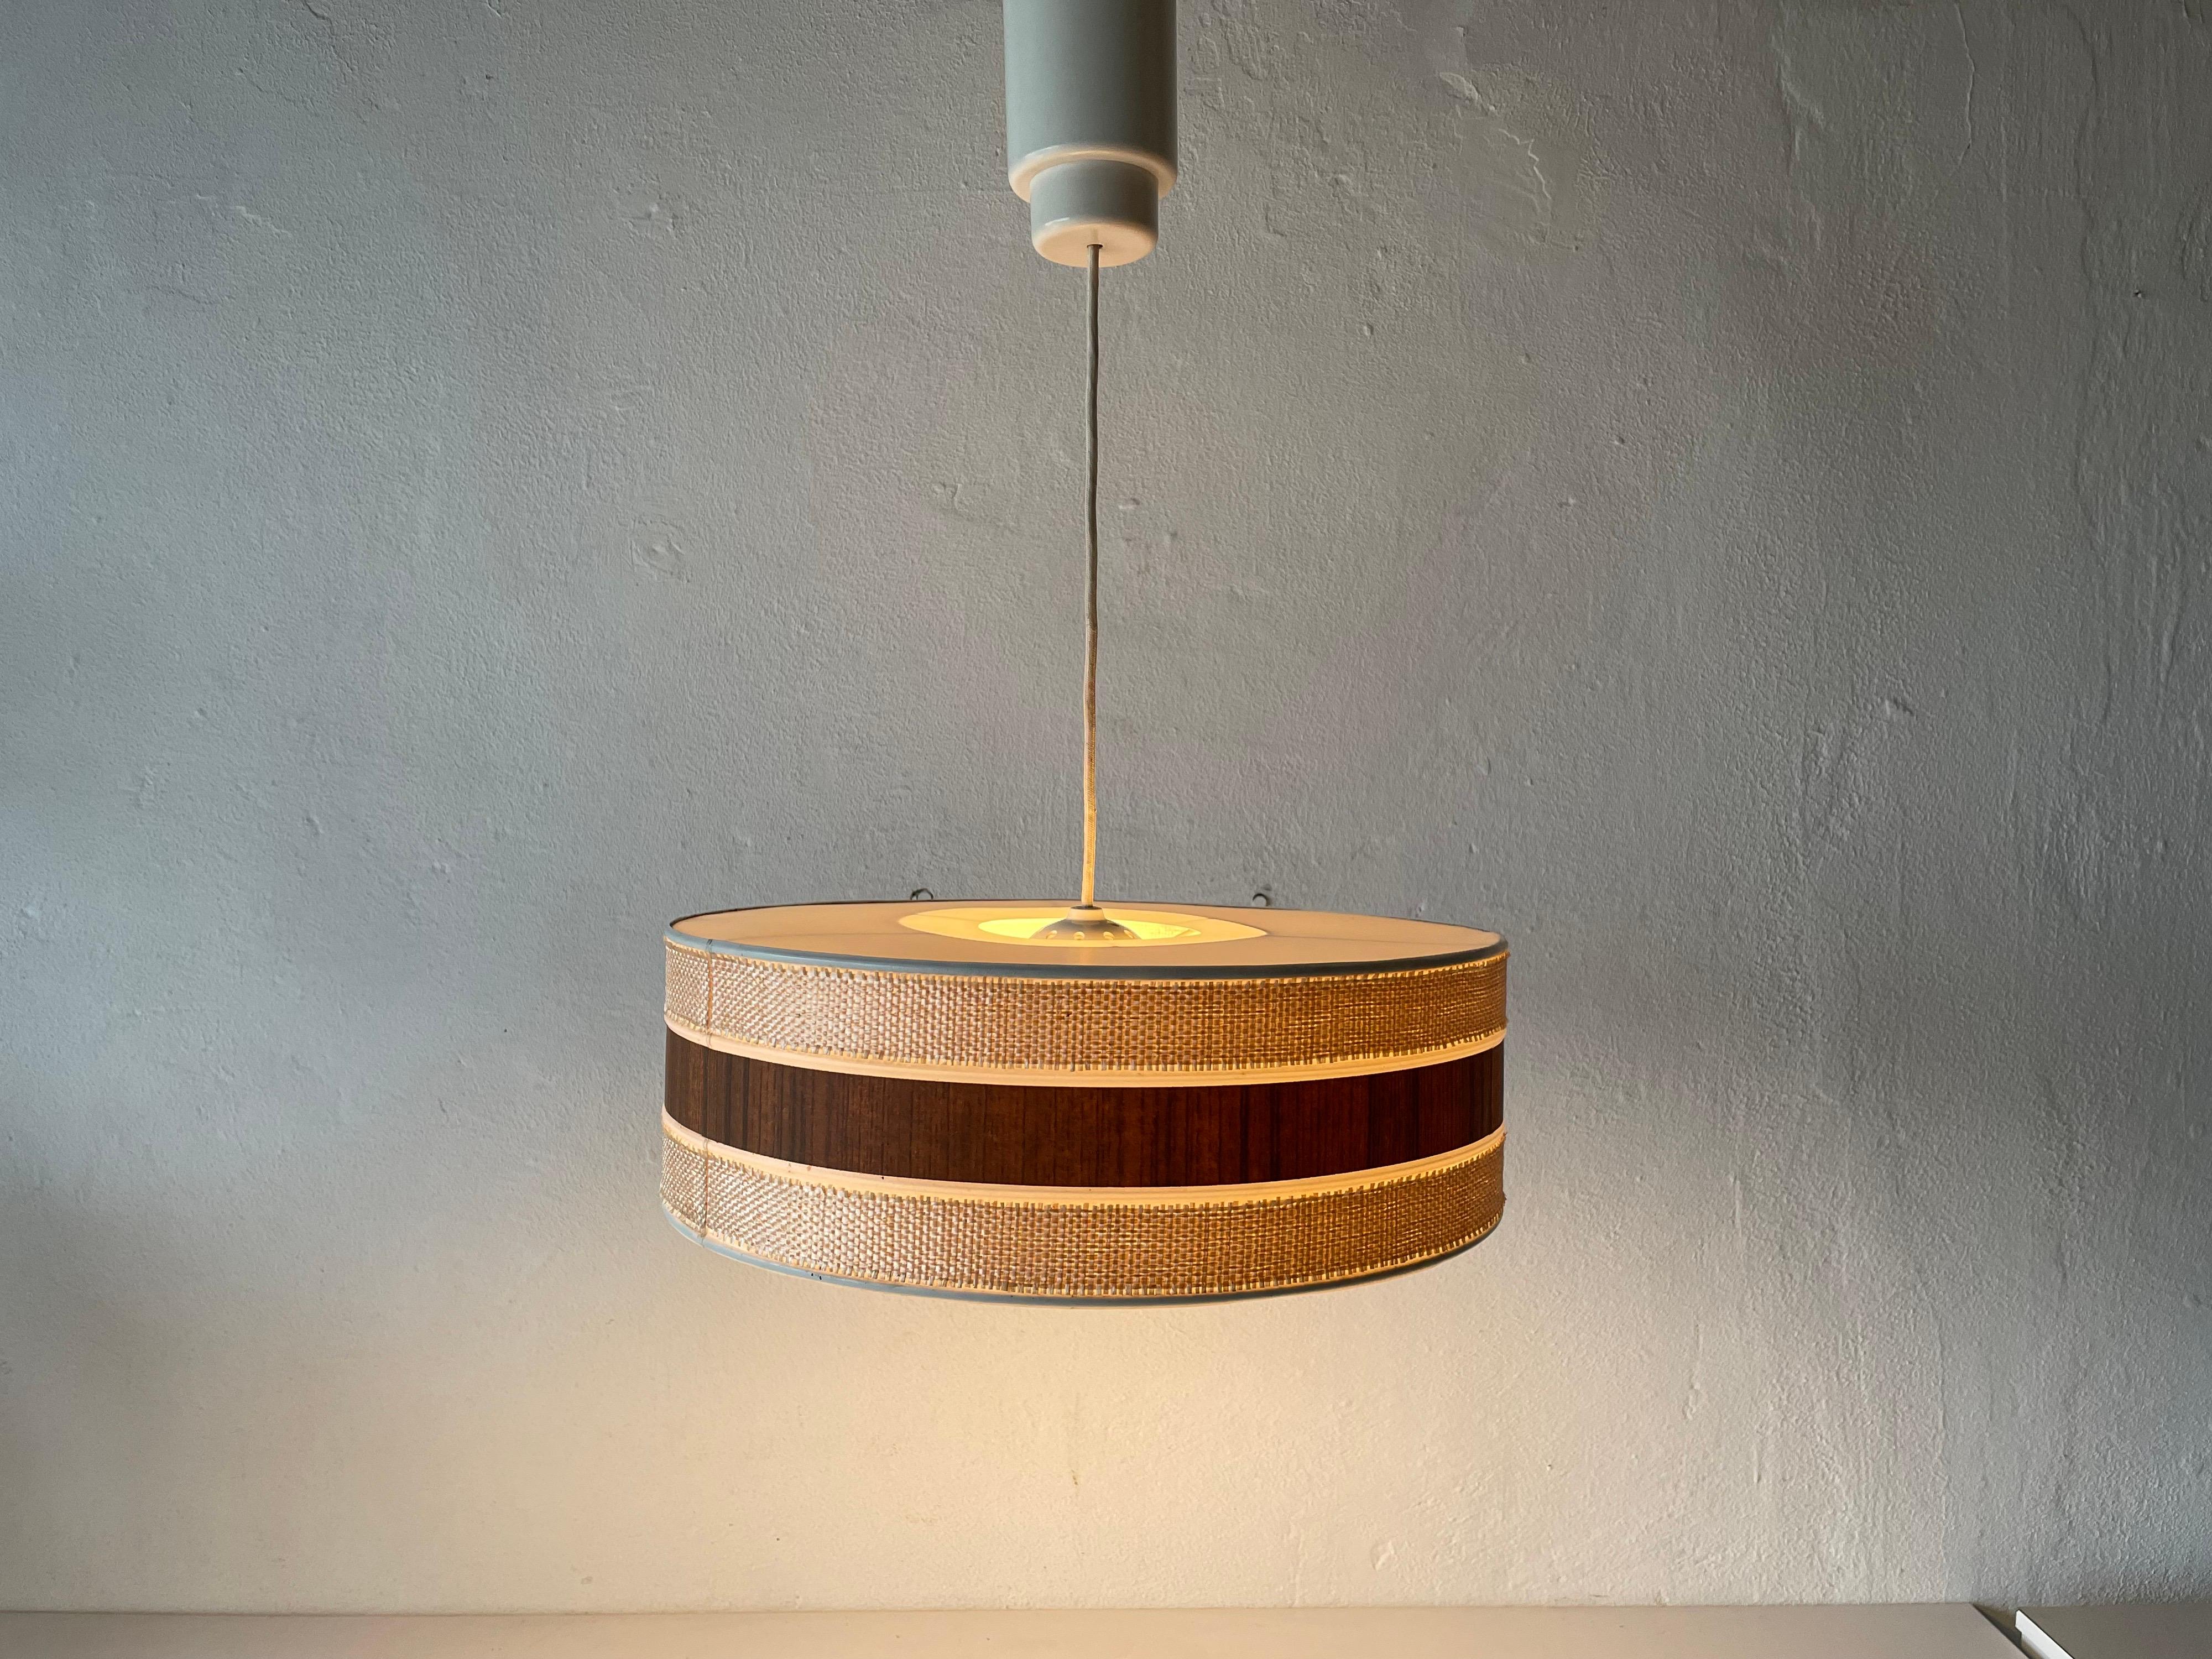 Rare Wooden and Fabric Mid-Century Pendant Lamp by Temde, 1960s Germany 5